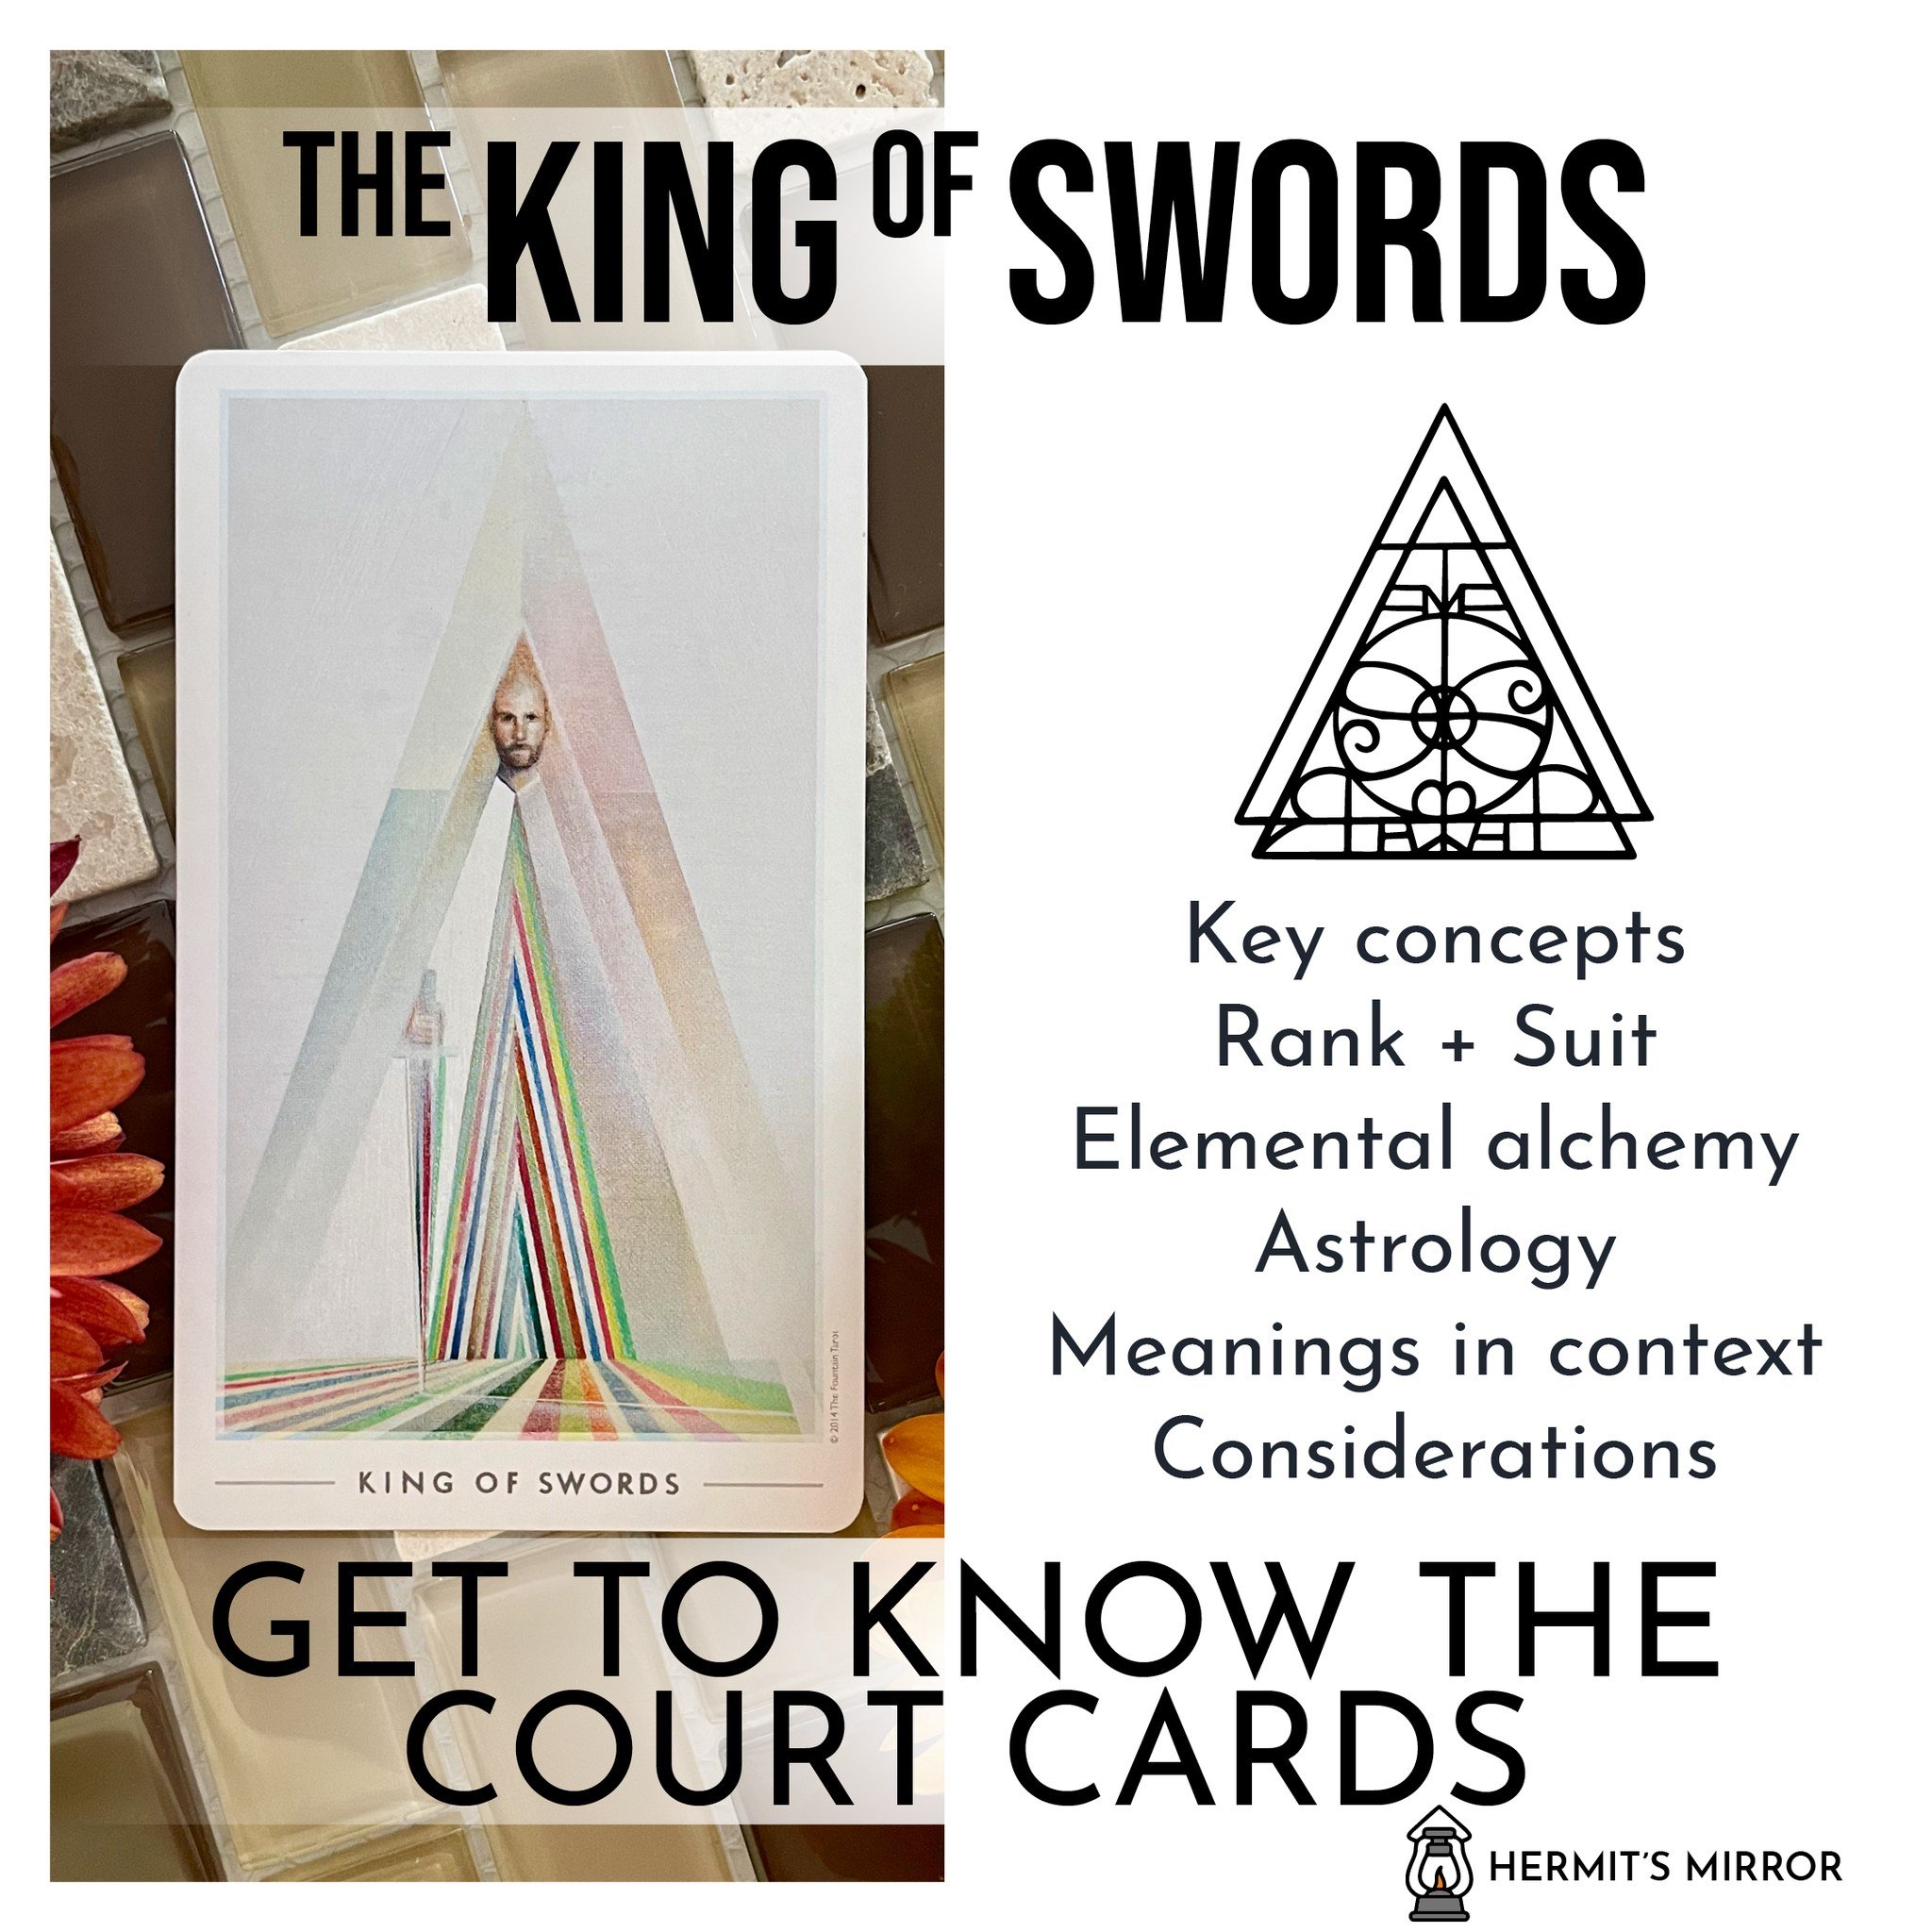 Get to Know the 🌬️ King of Swords
He's a whirlwind of ideas, a veritable genius, and an excellent communicator.

But like all the focused elemental courts (Air of Air), he can get swept up in the moment of genius. And sometimes he forgets to conside